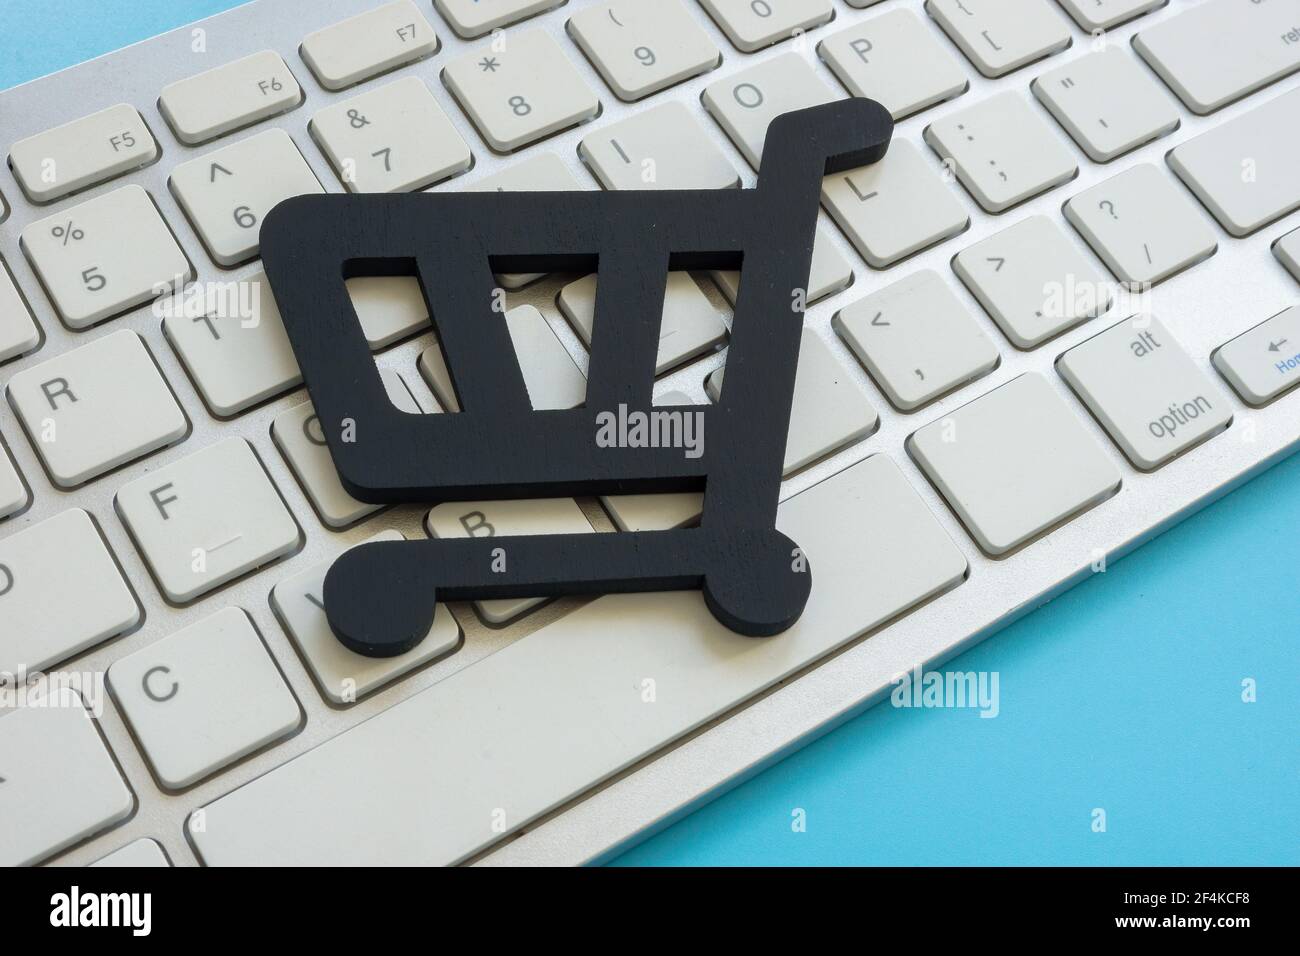 Shopping cart on the keyboard as symbol of online e-commerce. Stock Photo